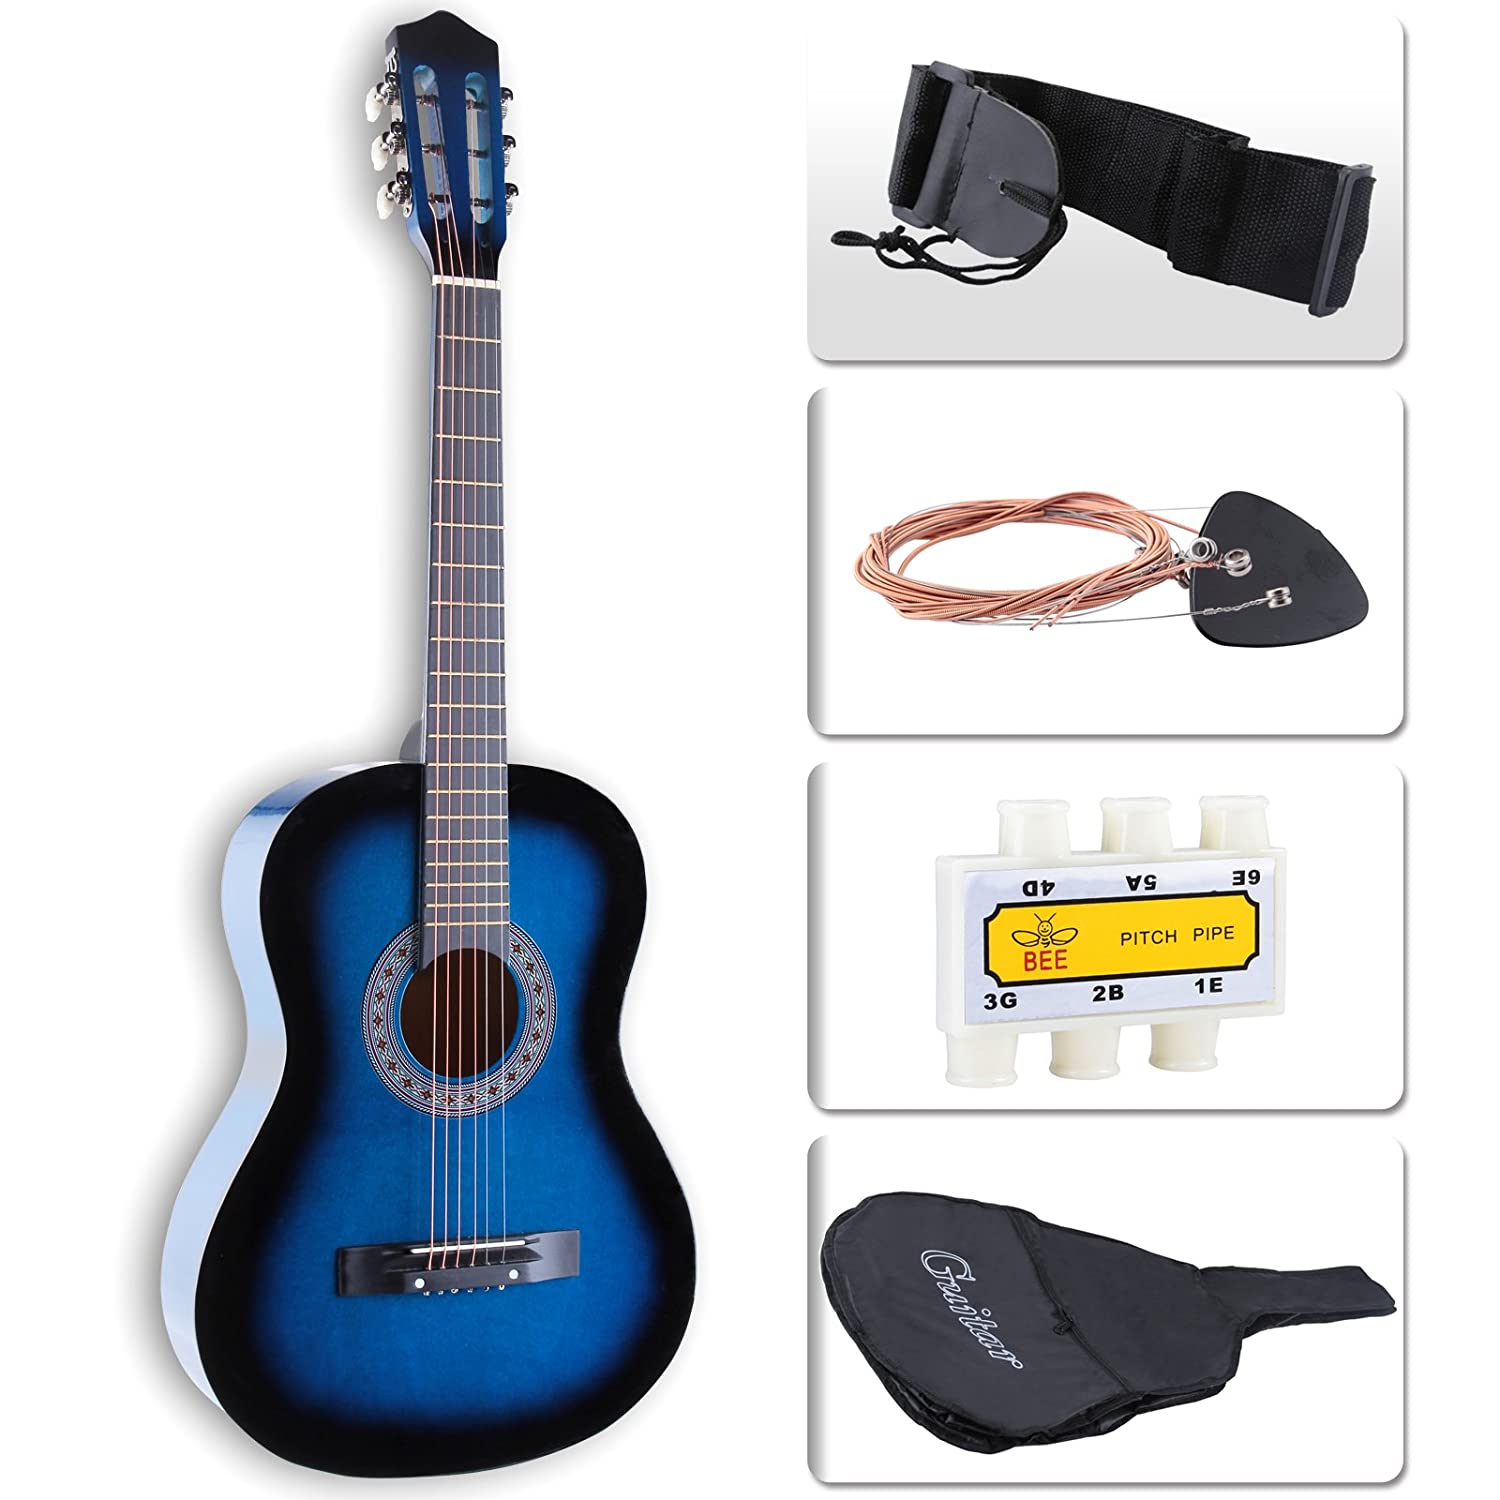 LAGRIMA Acoustic Guitar Beginners with Guitar Case, Strap, Tuner & Pick Steel Strings (Blue)